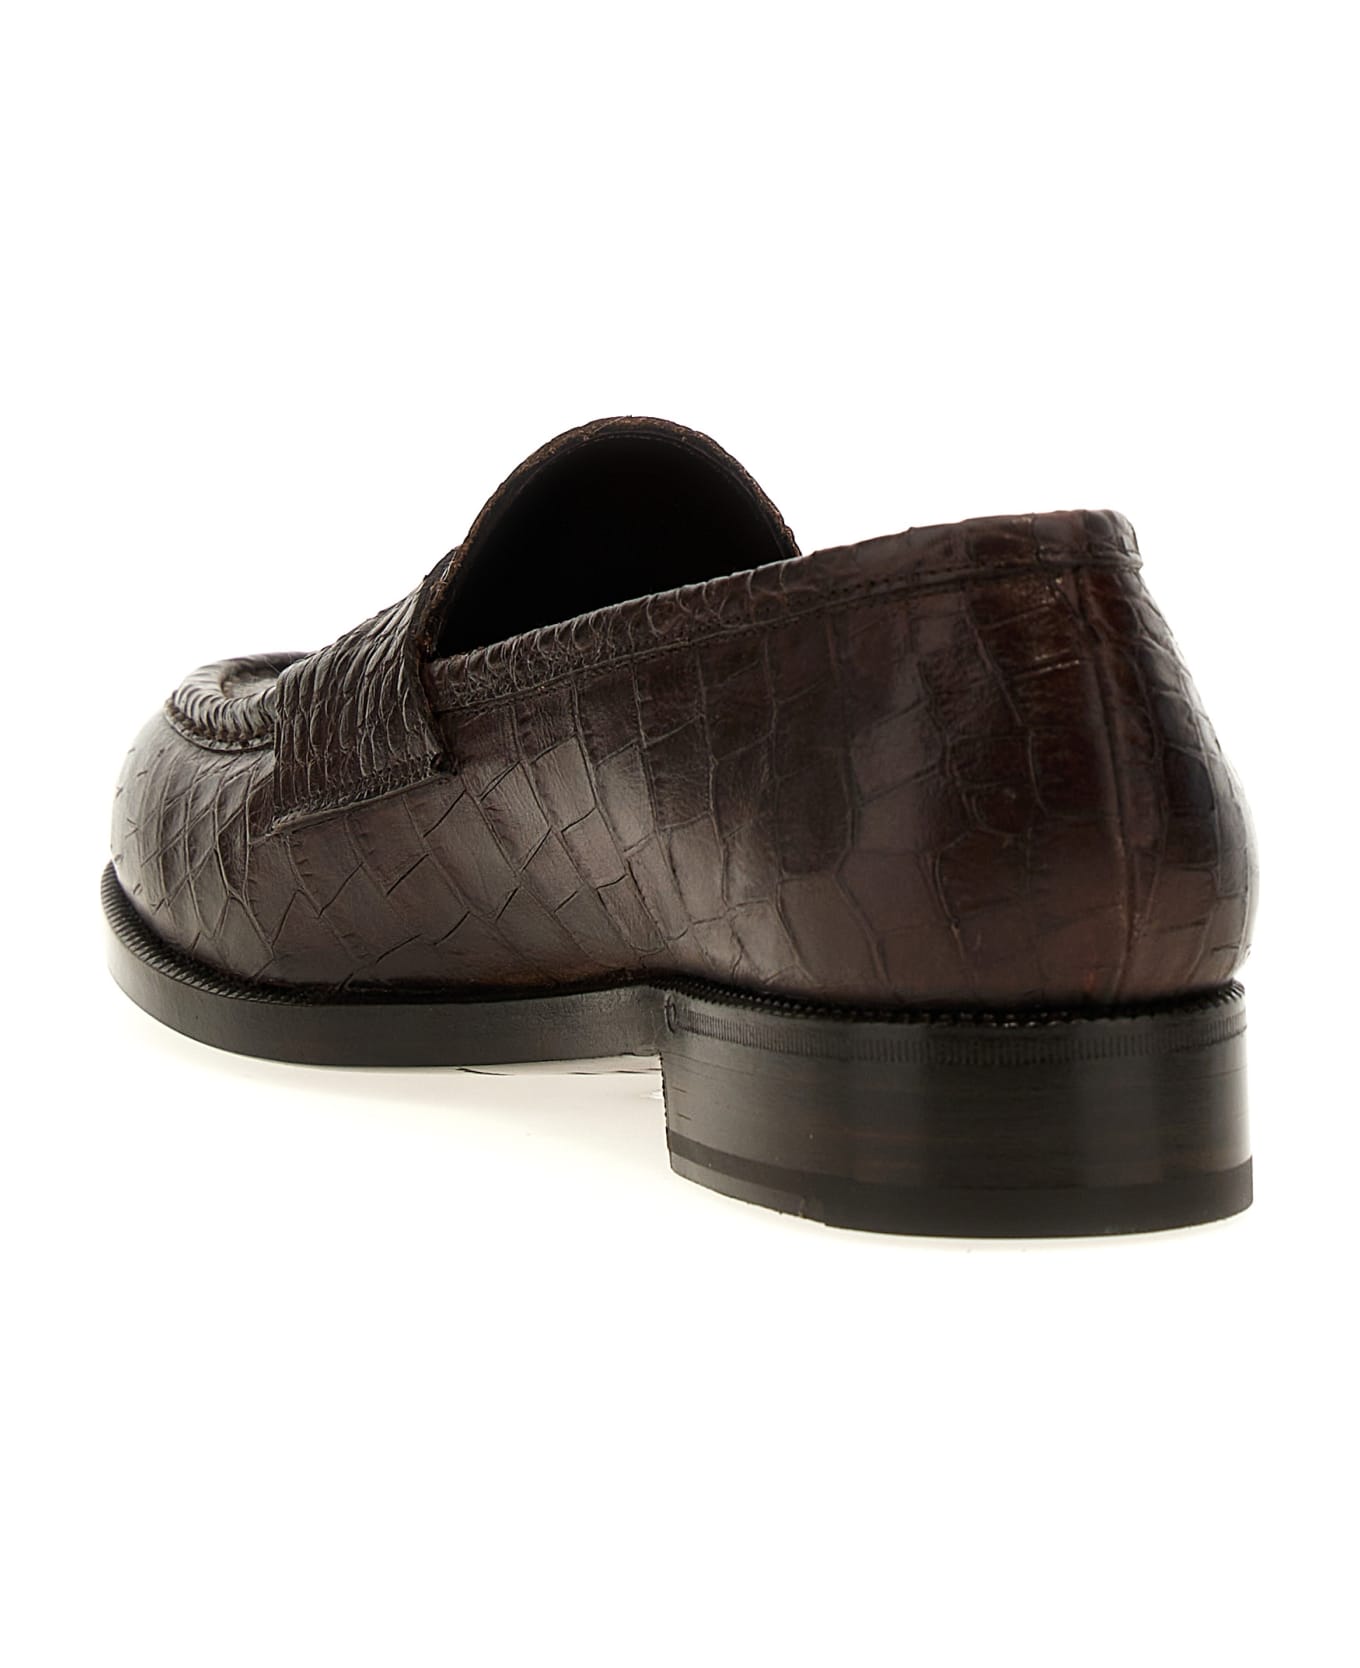 Lidfort Croc Print Leather Loafers - Brown